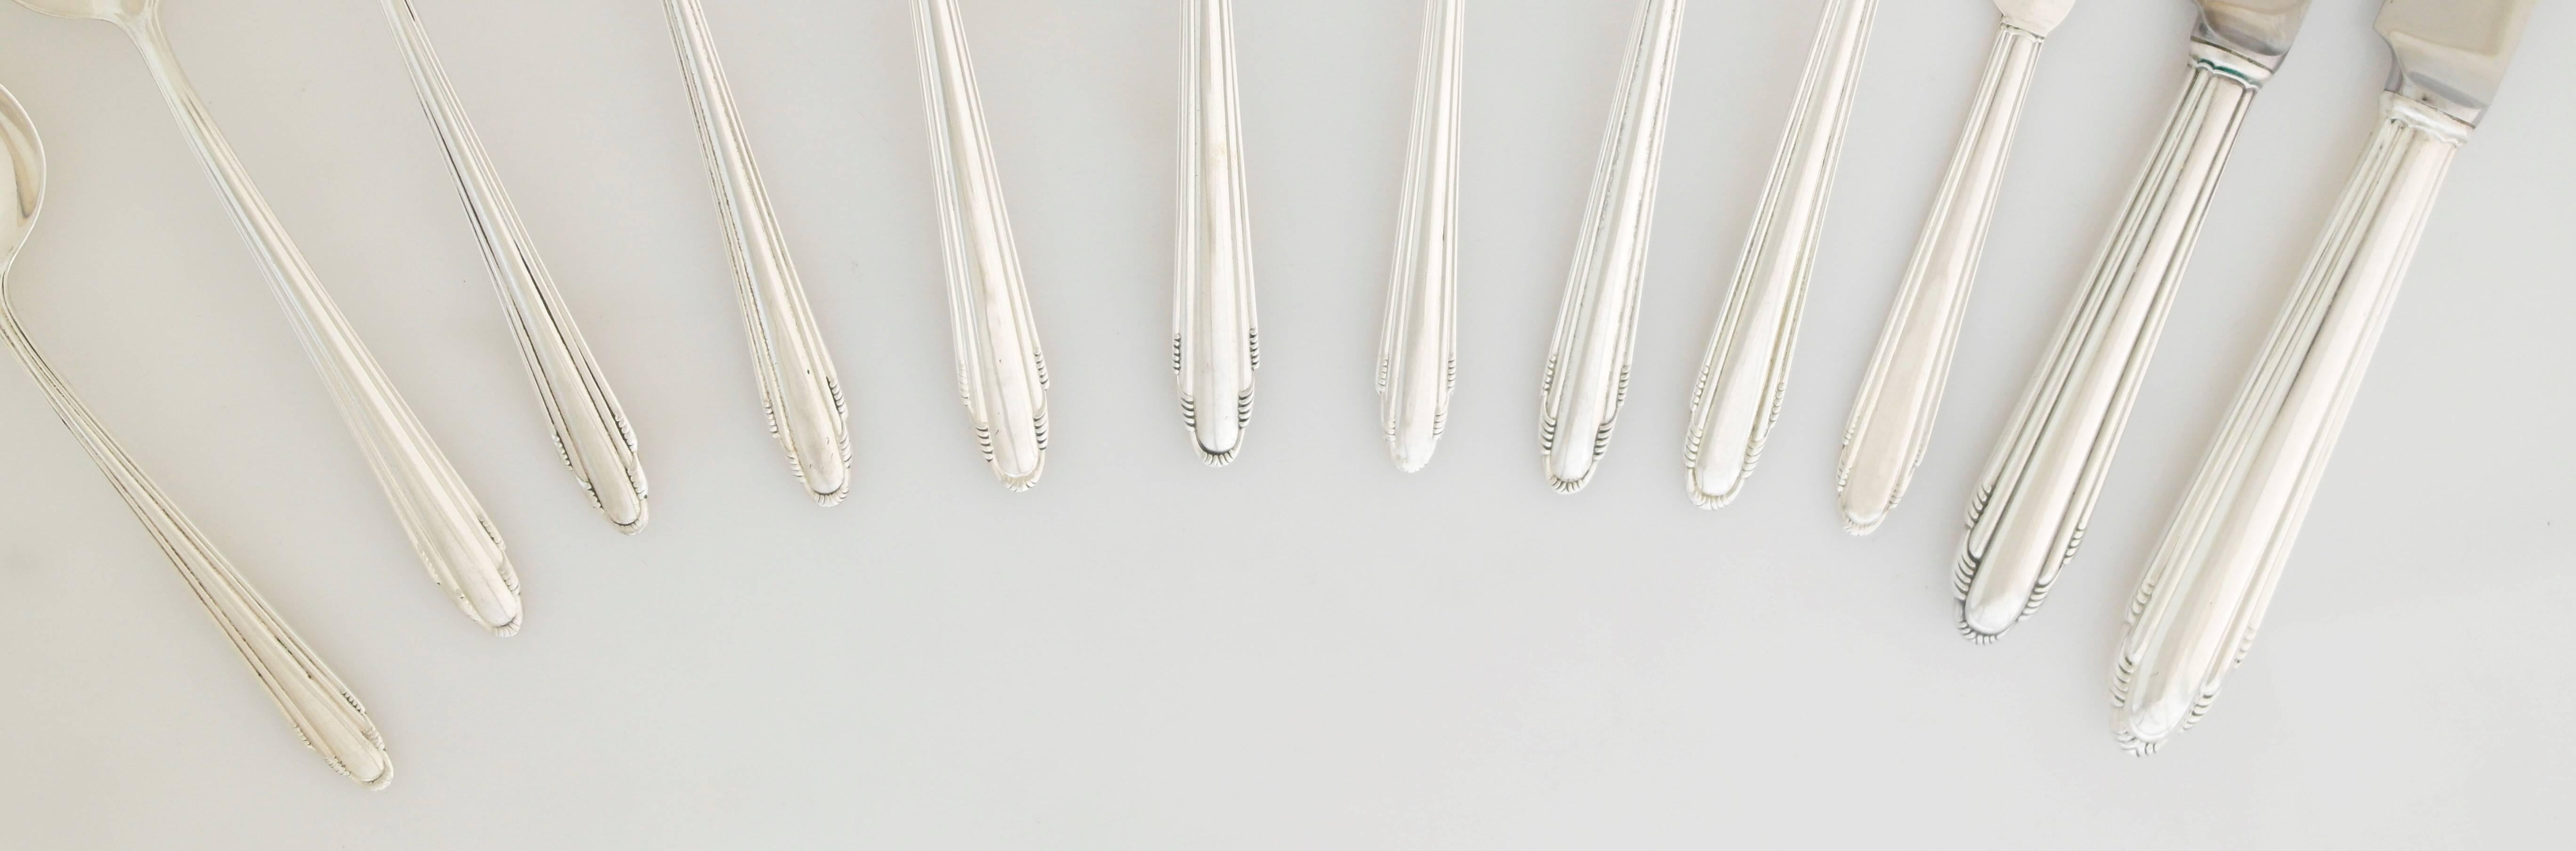 Being offered is a large and exceedingly rare sterling silver flatware set by Dominick & Haff of New York. In the Contempora pattern designed in 1930 by famed architect Eliel Saarinen.

In 1927, Finnish-born Eliel Saarinen was one of nine